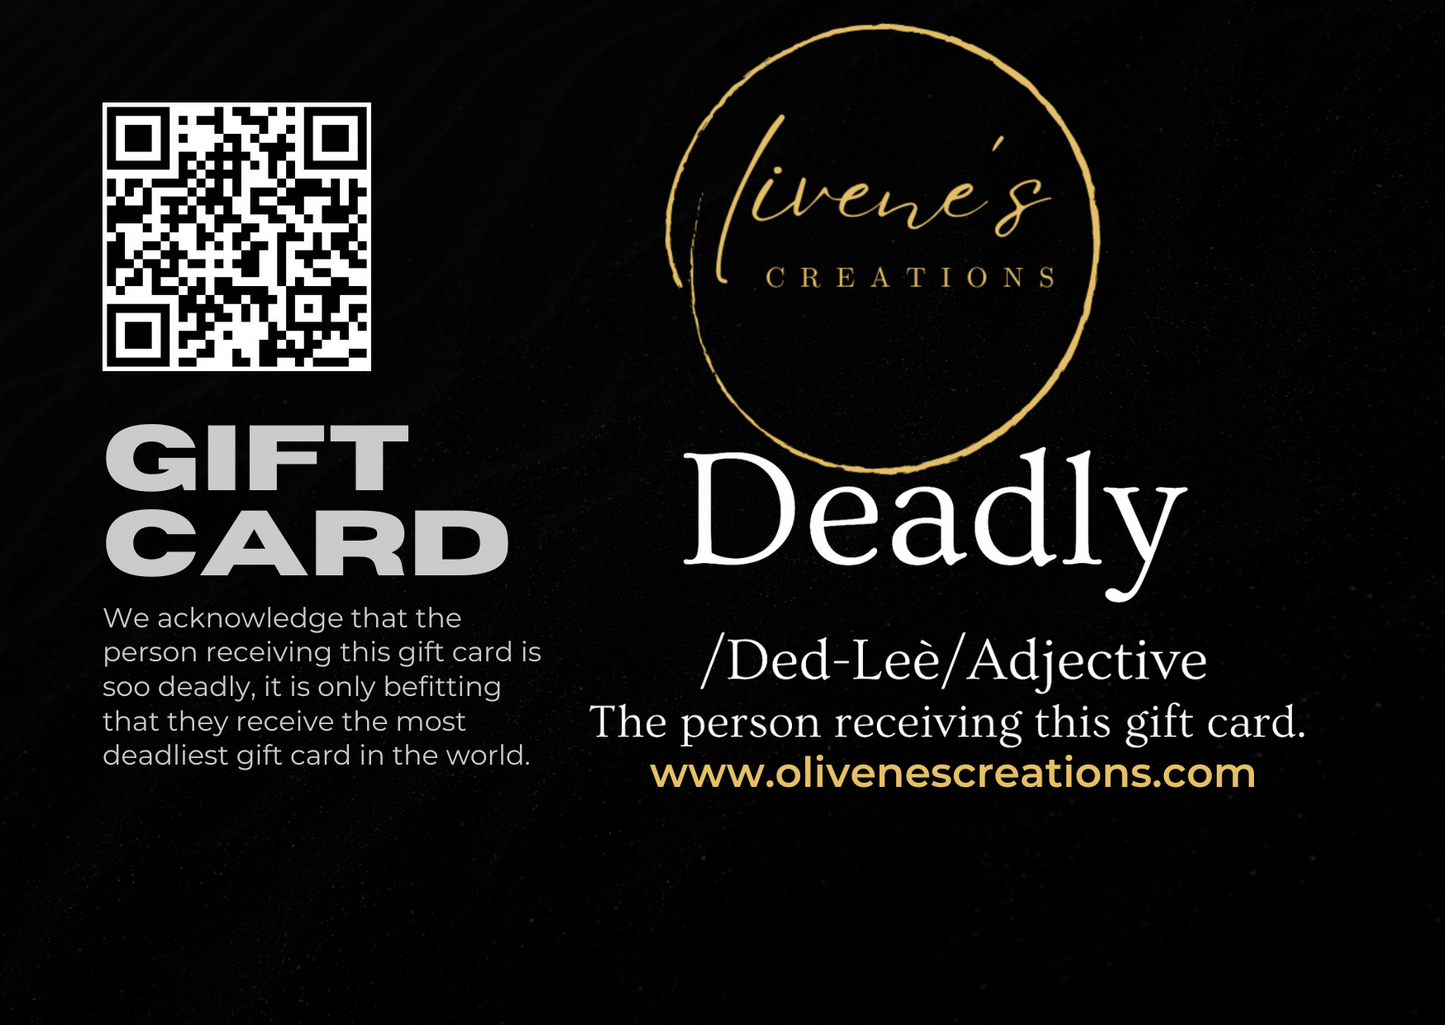 For the Deadly One Gift Card